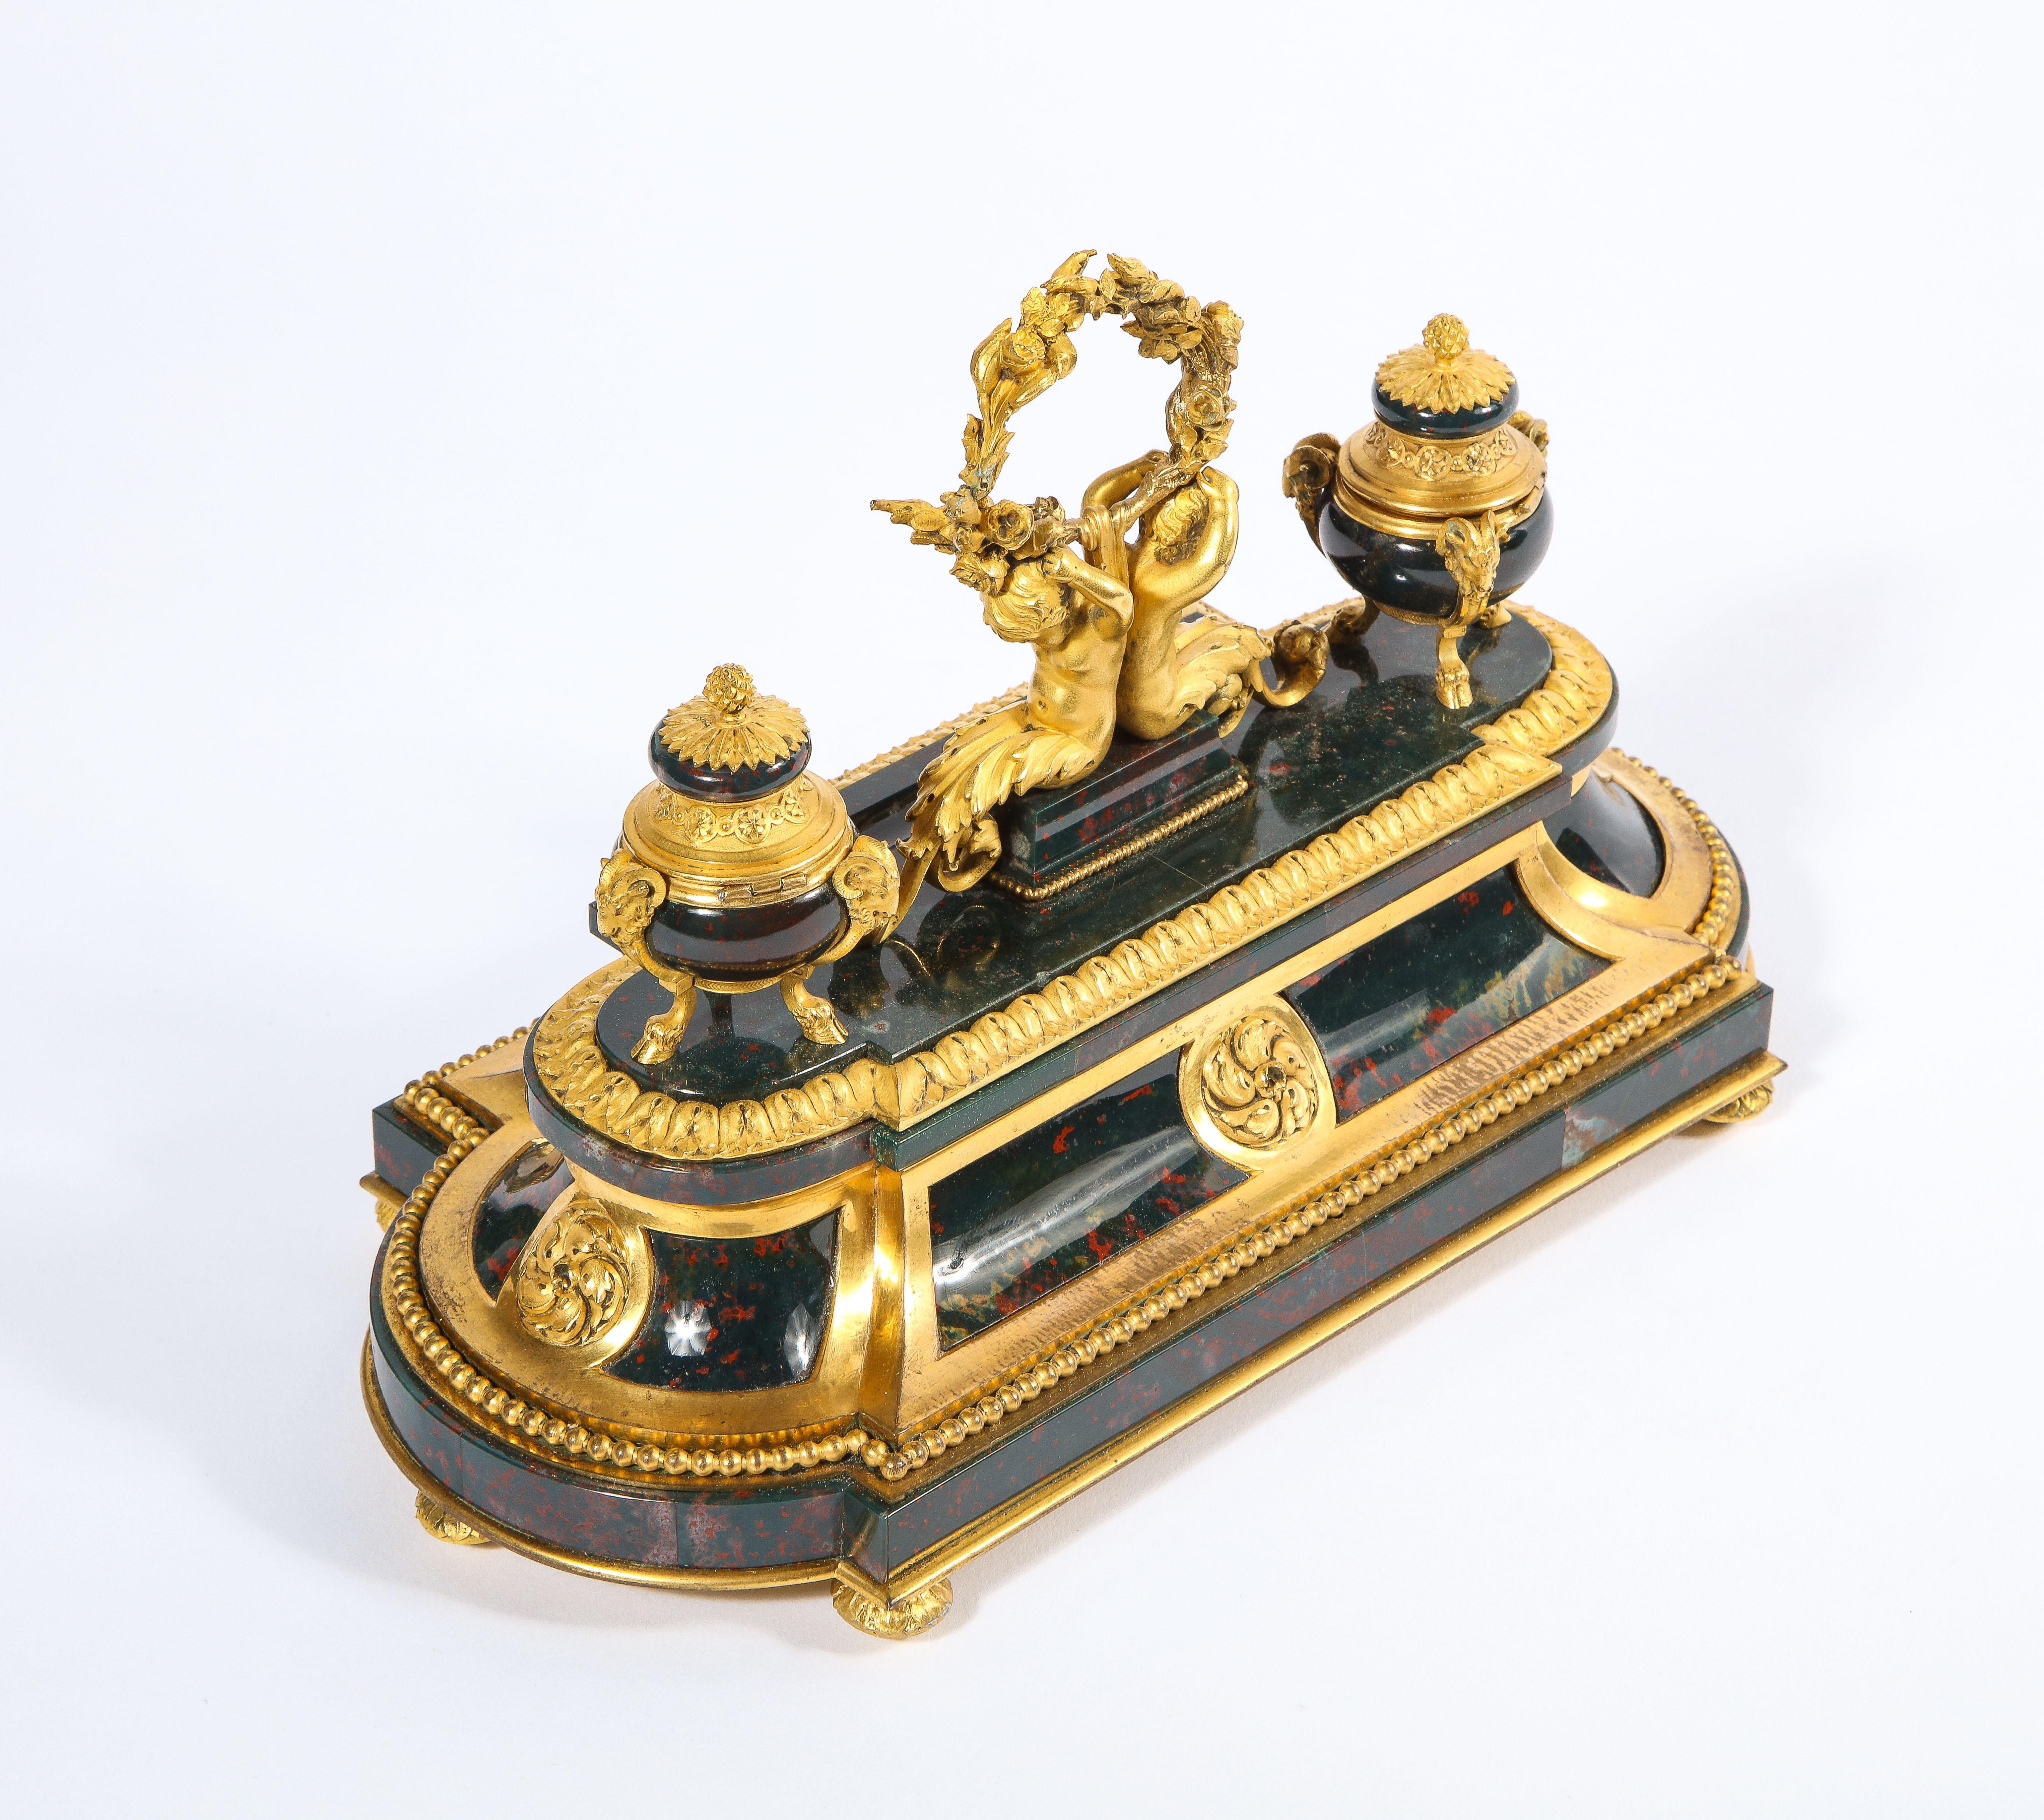 An Exquisite and Rare French Louis XVI Style Ormolu-Mounted Bloodstone Inkwell For Sale 6